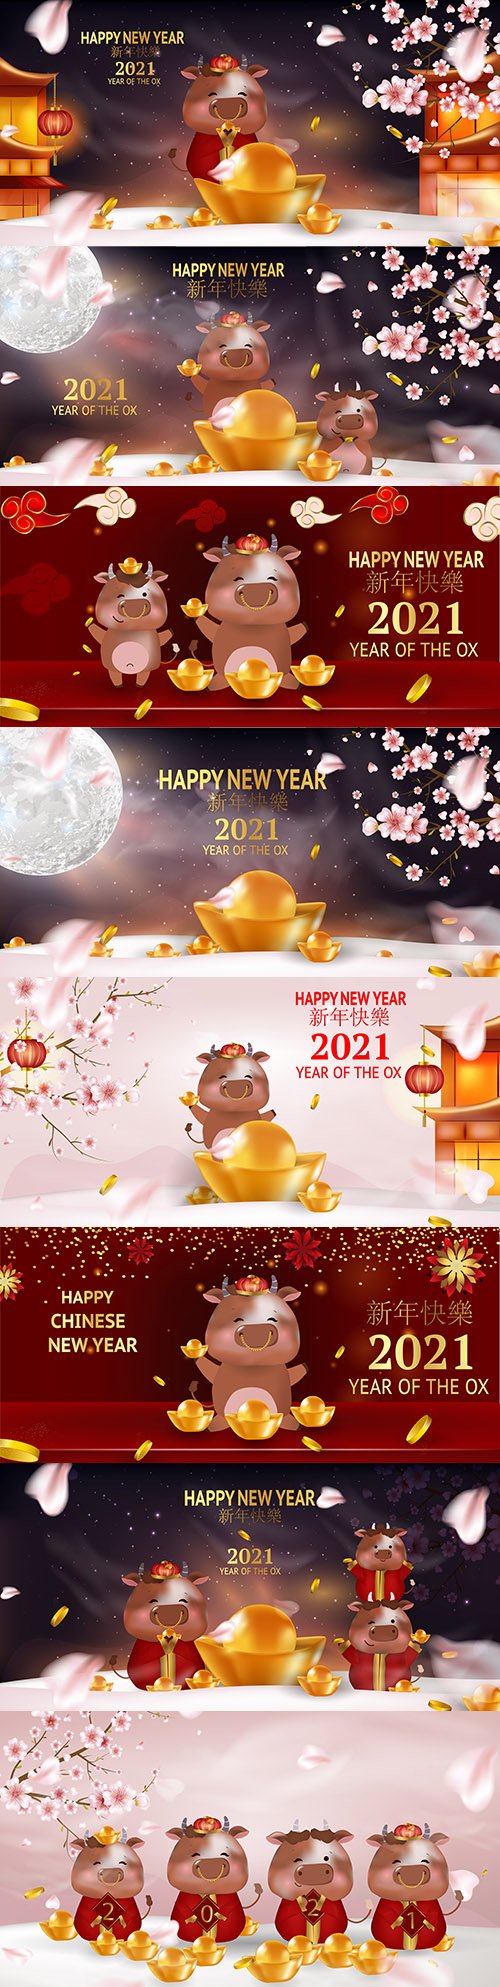 Greeting card for Chinese New Year of Bull 2021